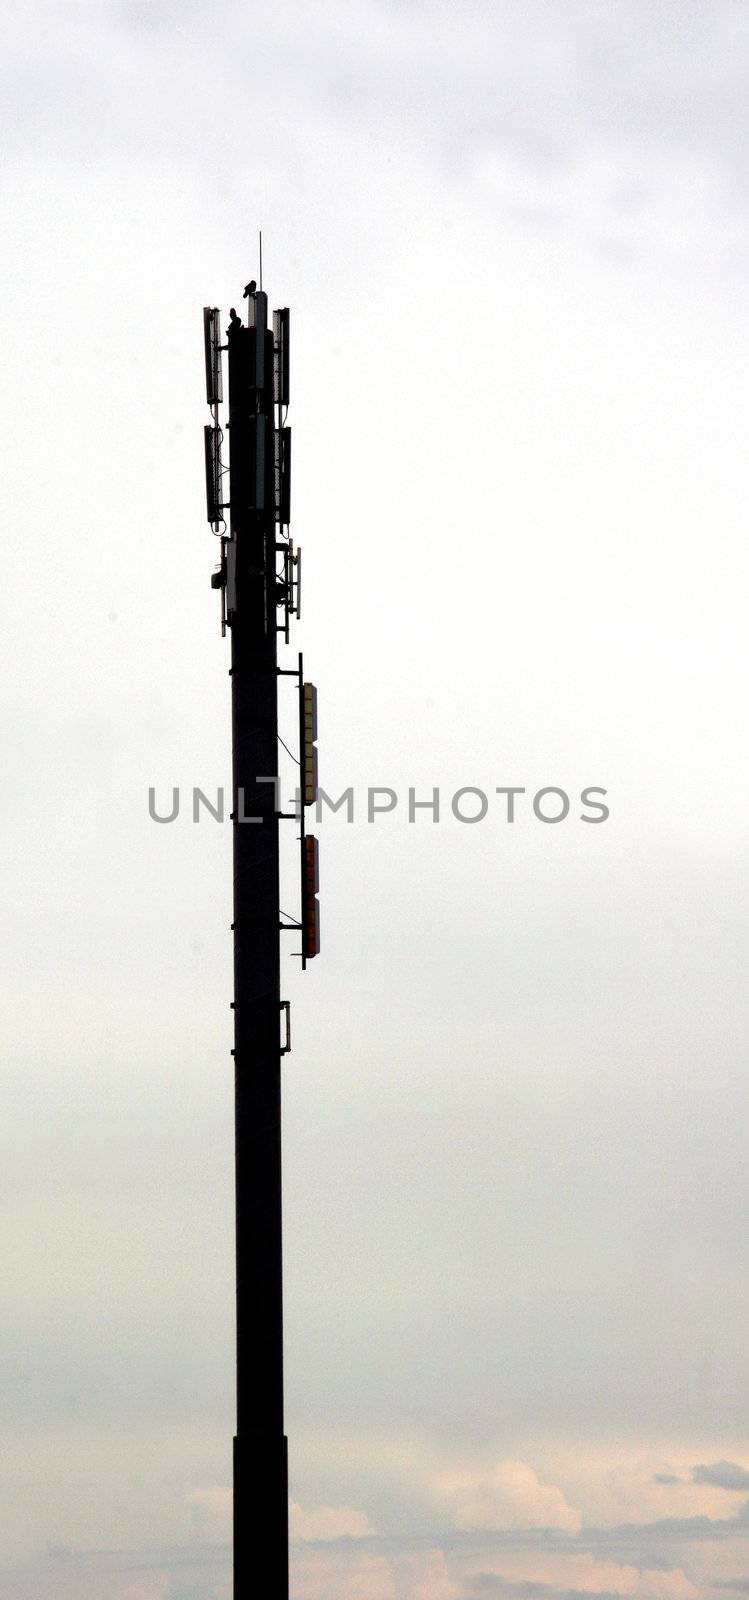 Cell  phone tower by Imagecom